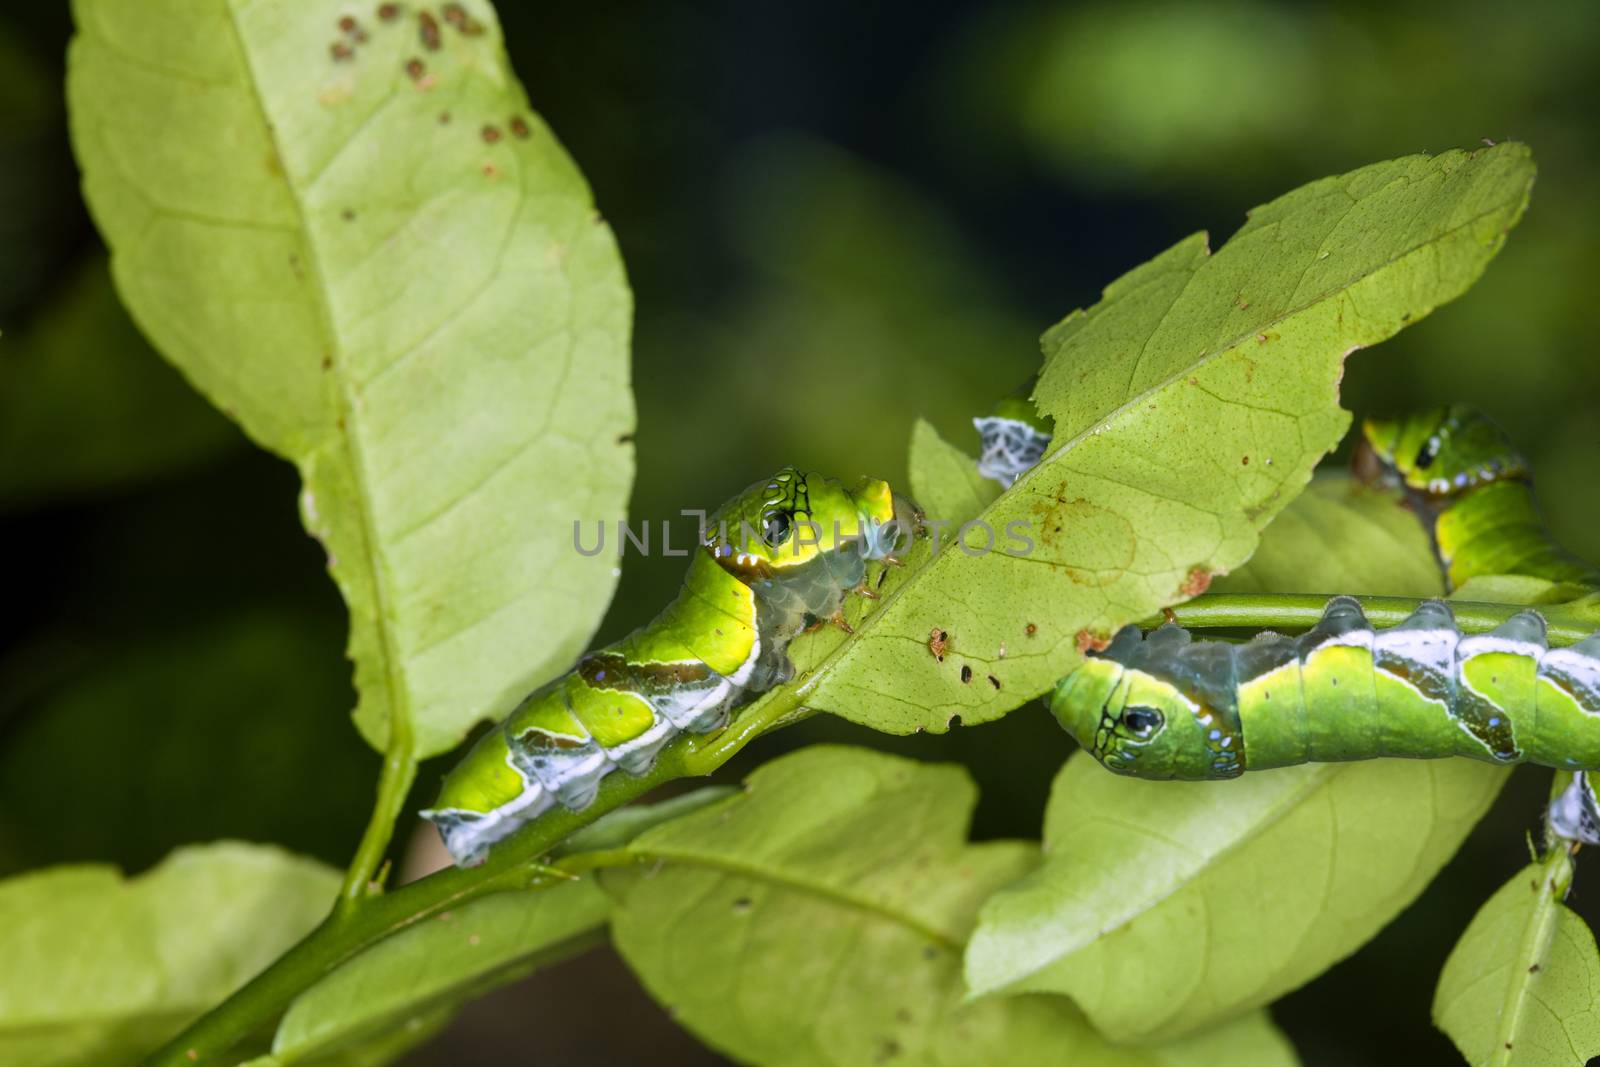 A group of Moth Caterpillars on leaf. Agriculture pest caterpillar icon. Macro of caterpillars on nature background.